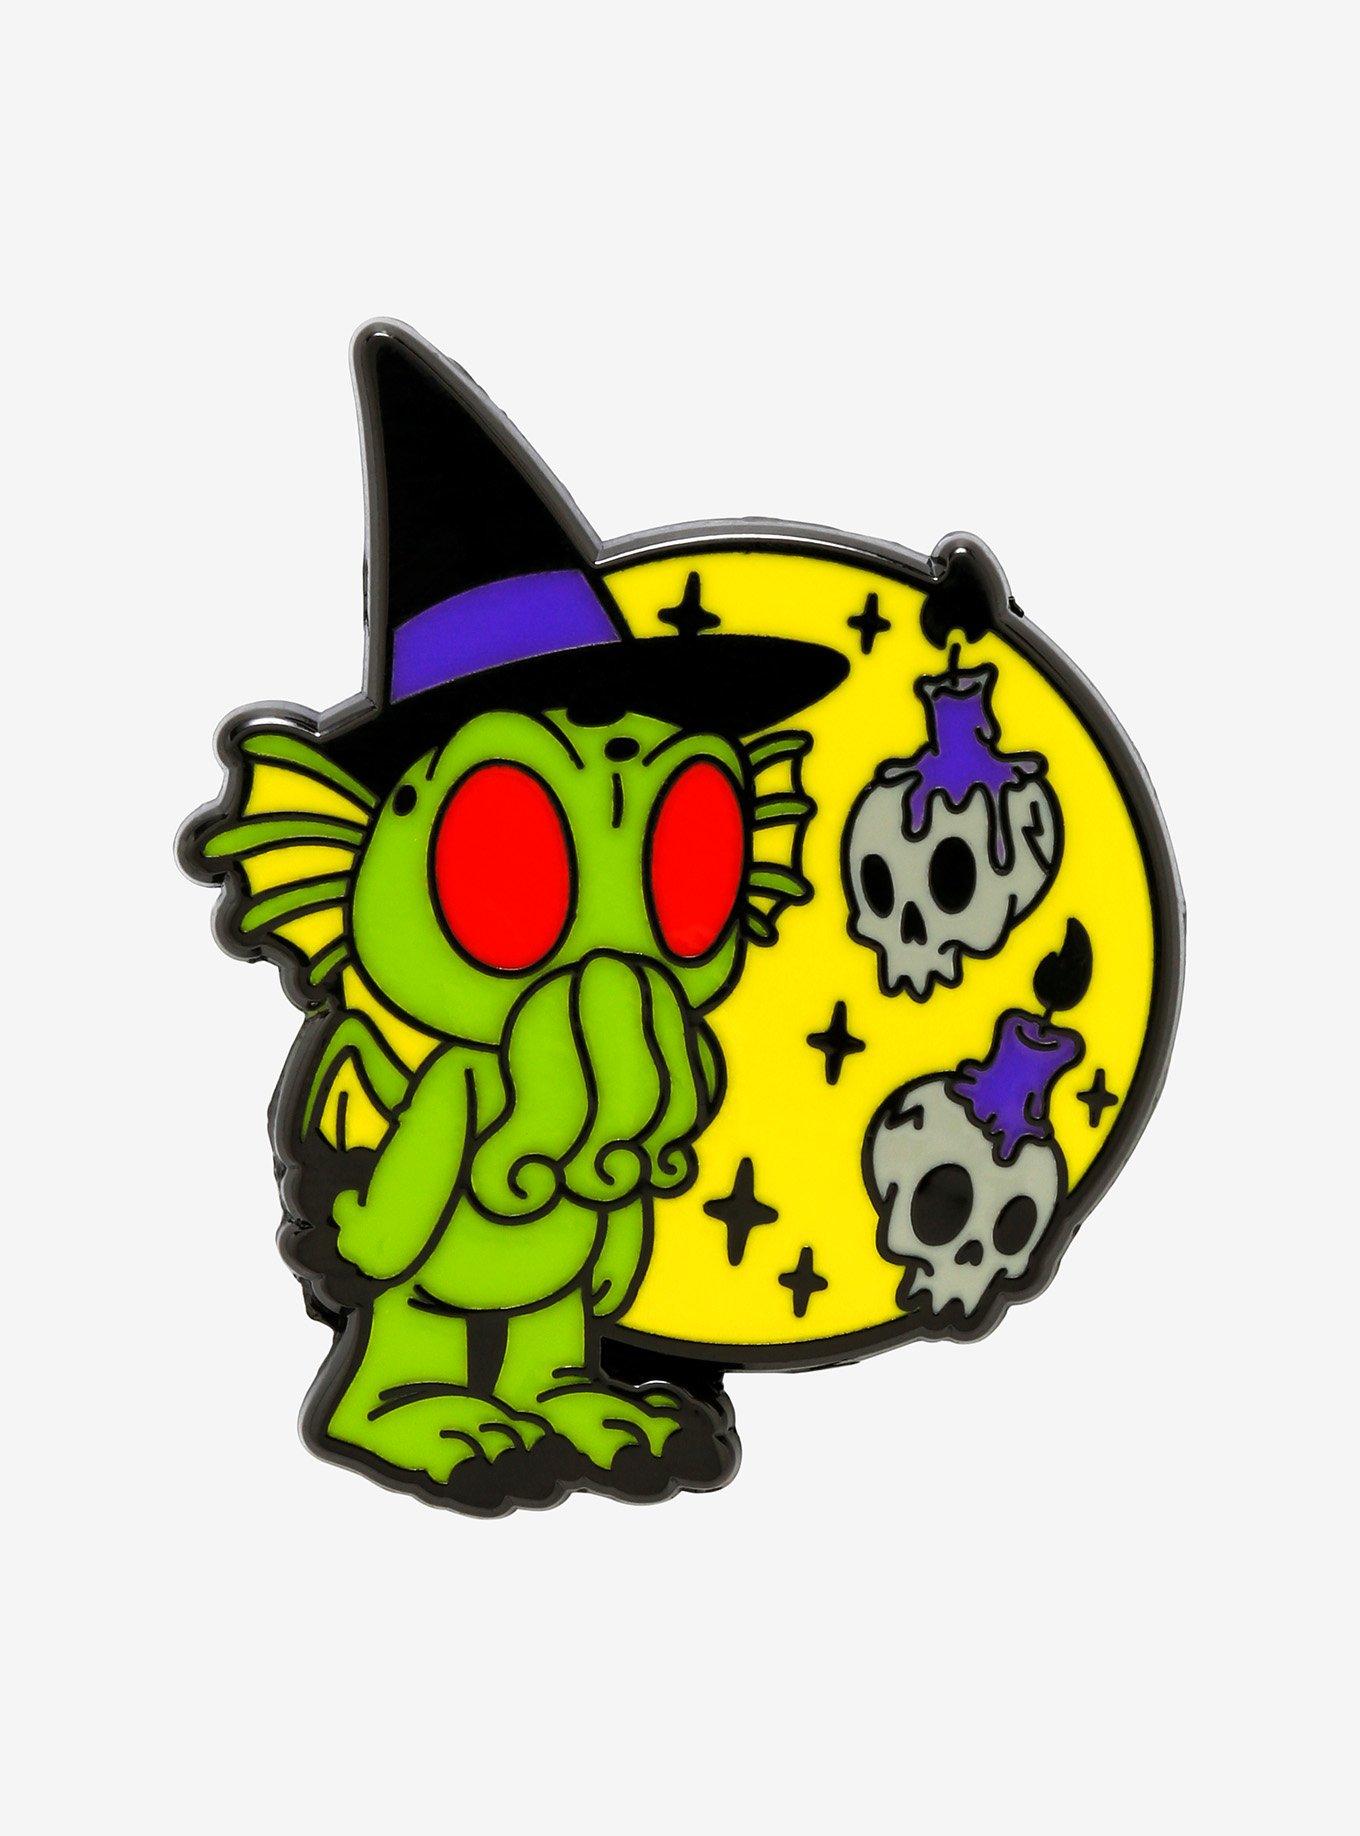 Cryptozoic Cryptkins Cthulhu Halloween Enamel Pin Hot Topic Exclusive, , hi-res